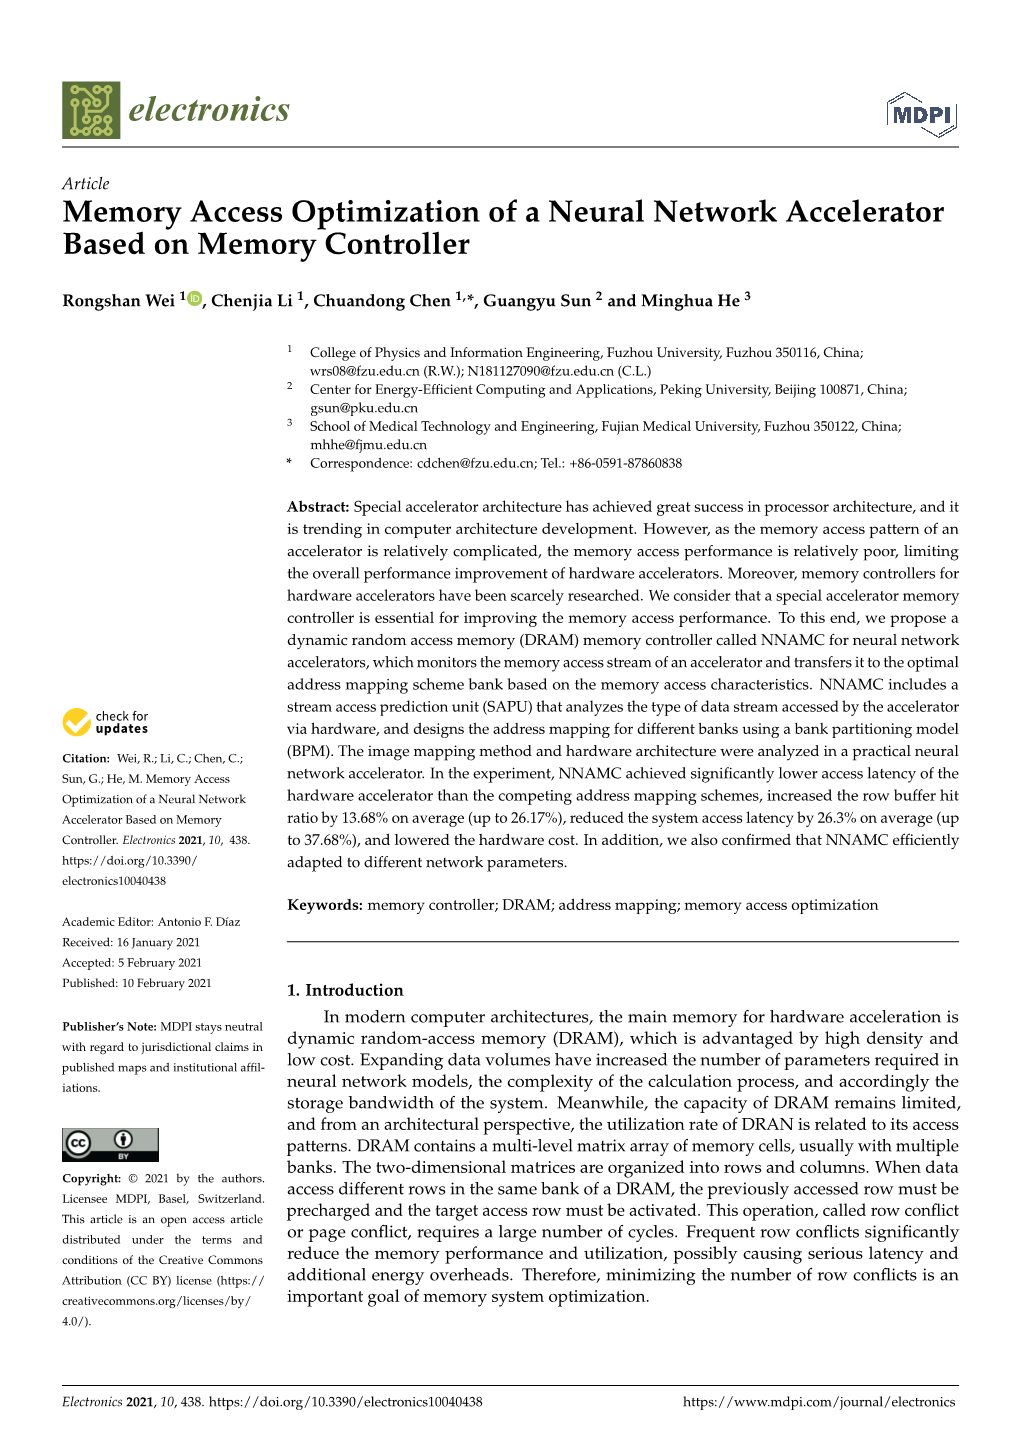 Memory Access Optimization of a Neural Network Accelerator Based on Memory Controller